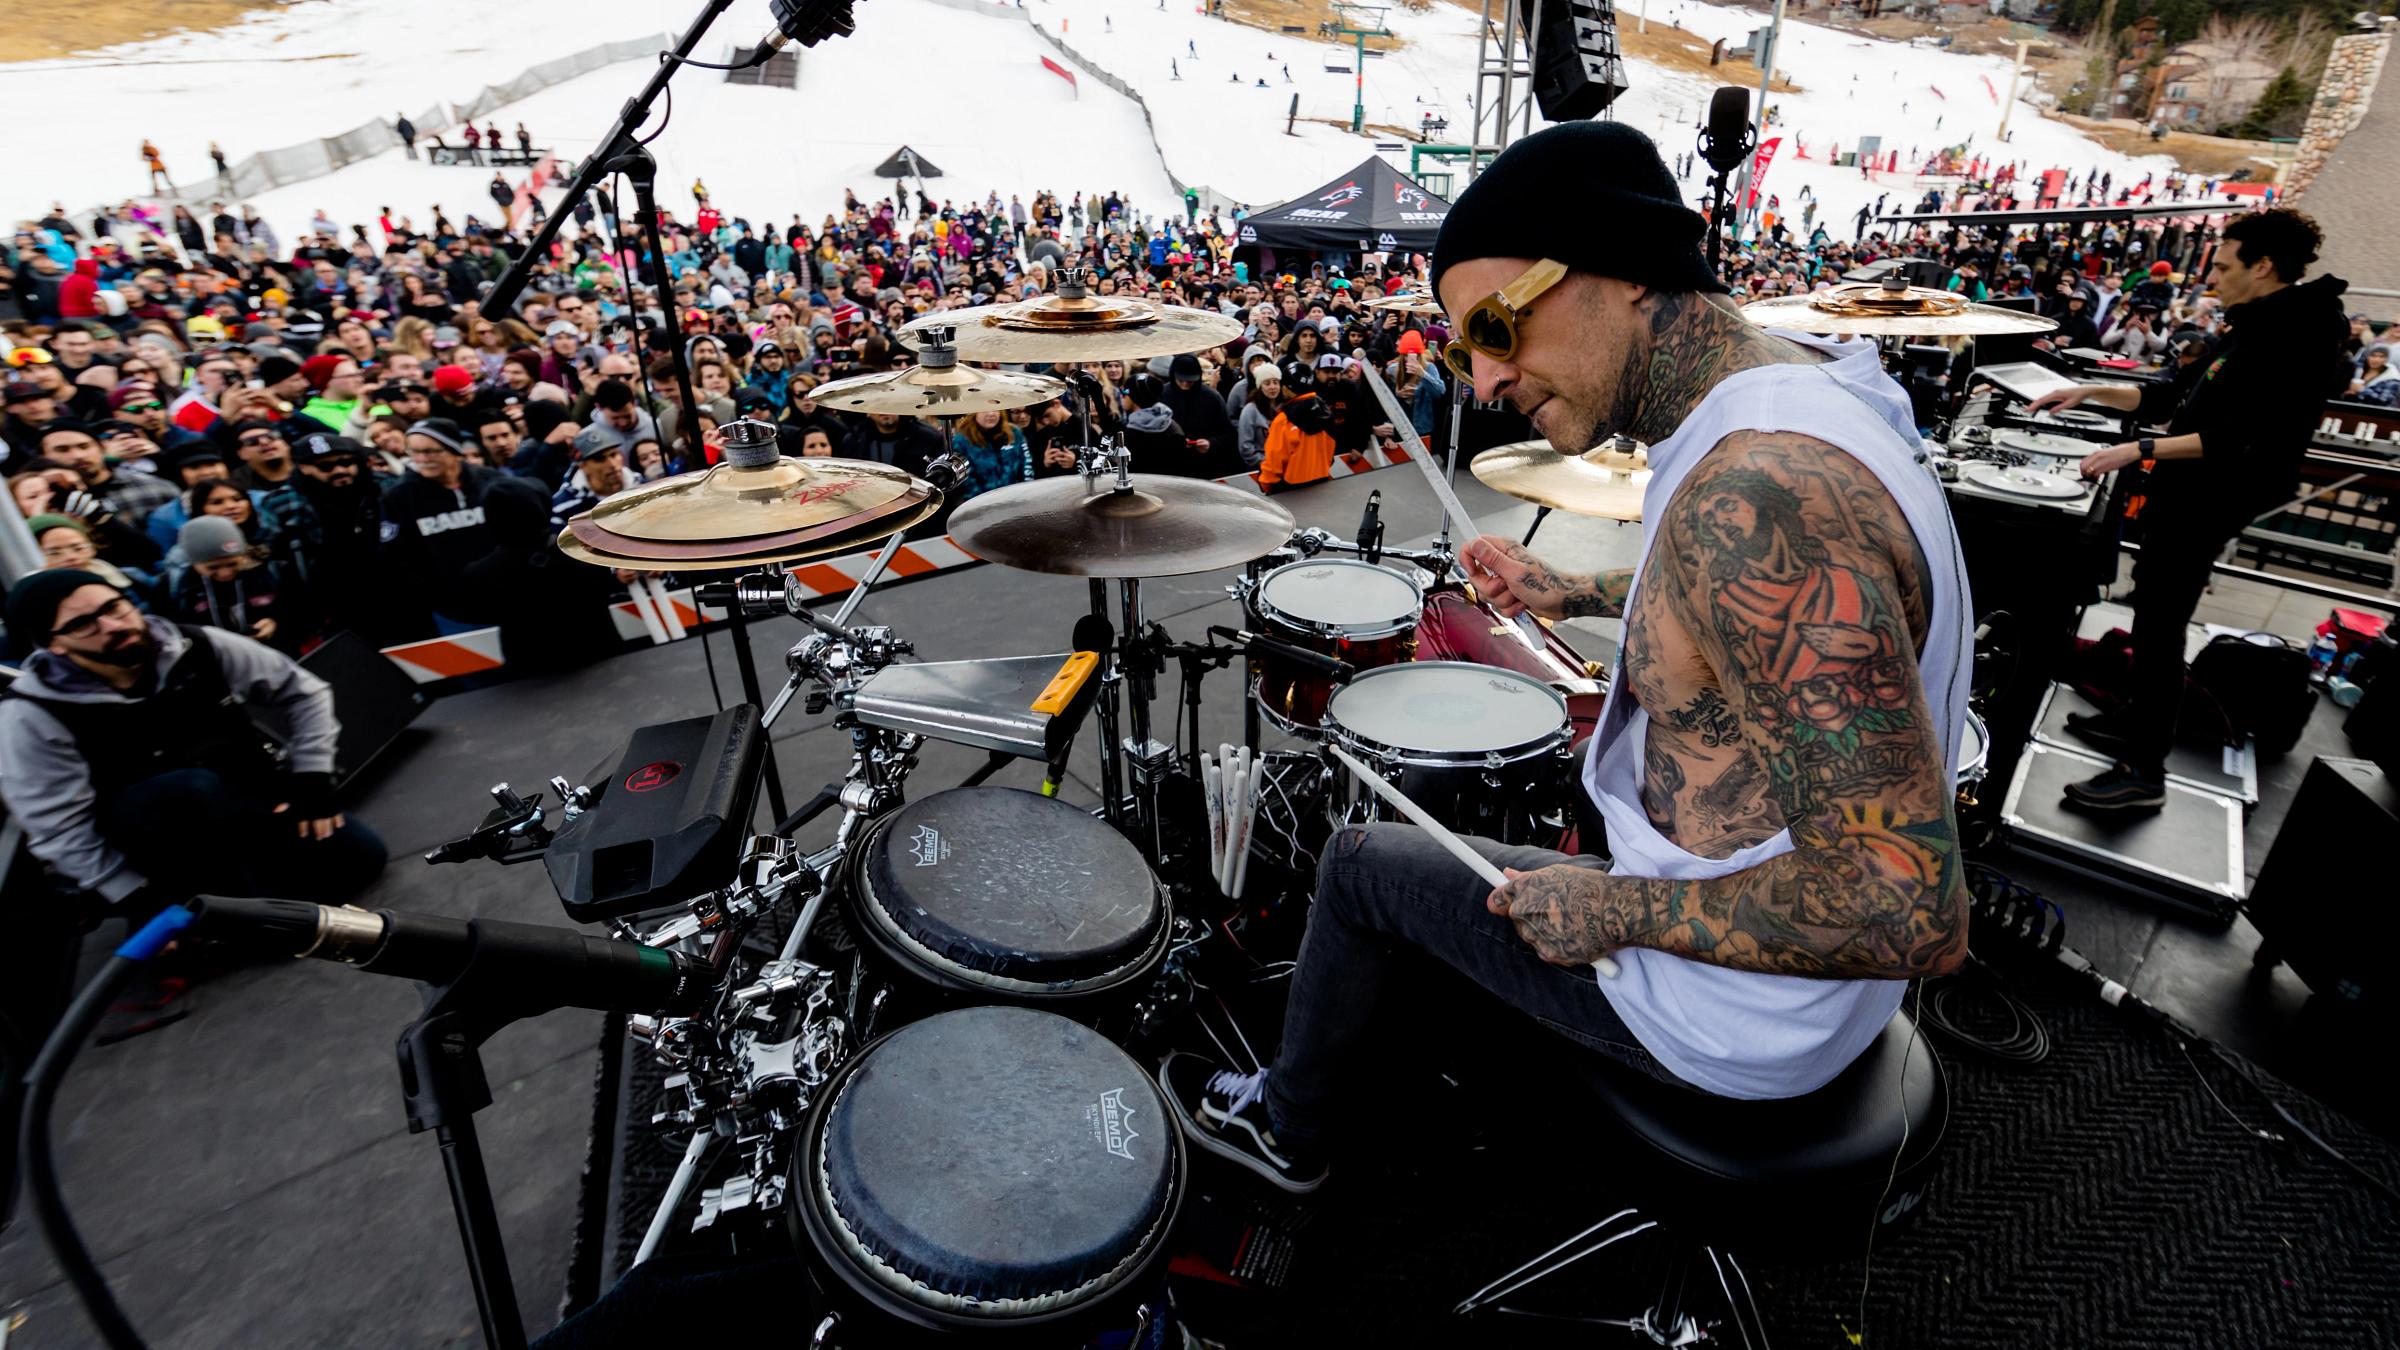 Travis Barker playing the drums at bear mountain